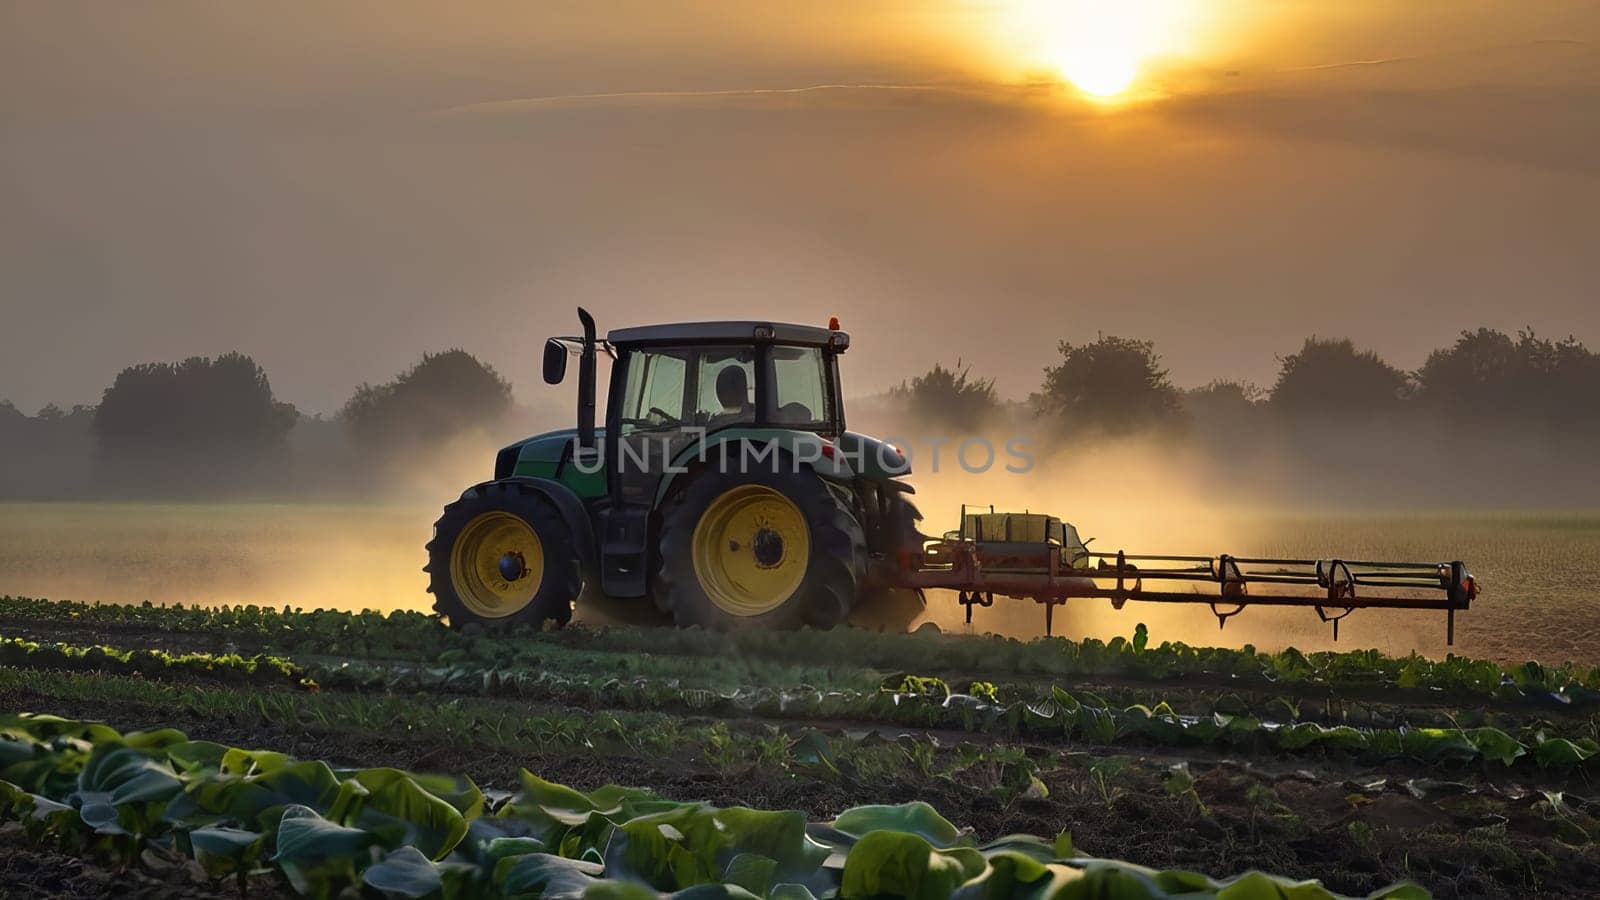 A modern tractor equipped with spray booms is seen in a misty field during the early morning. The tractor is spraying crops, creating a picturesque agricultural scene. by Annu1tochka